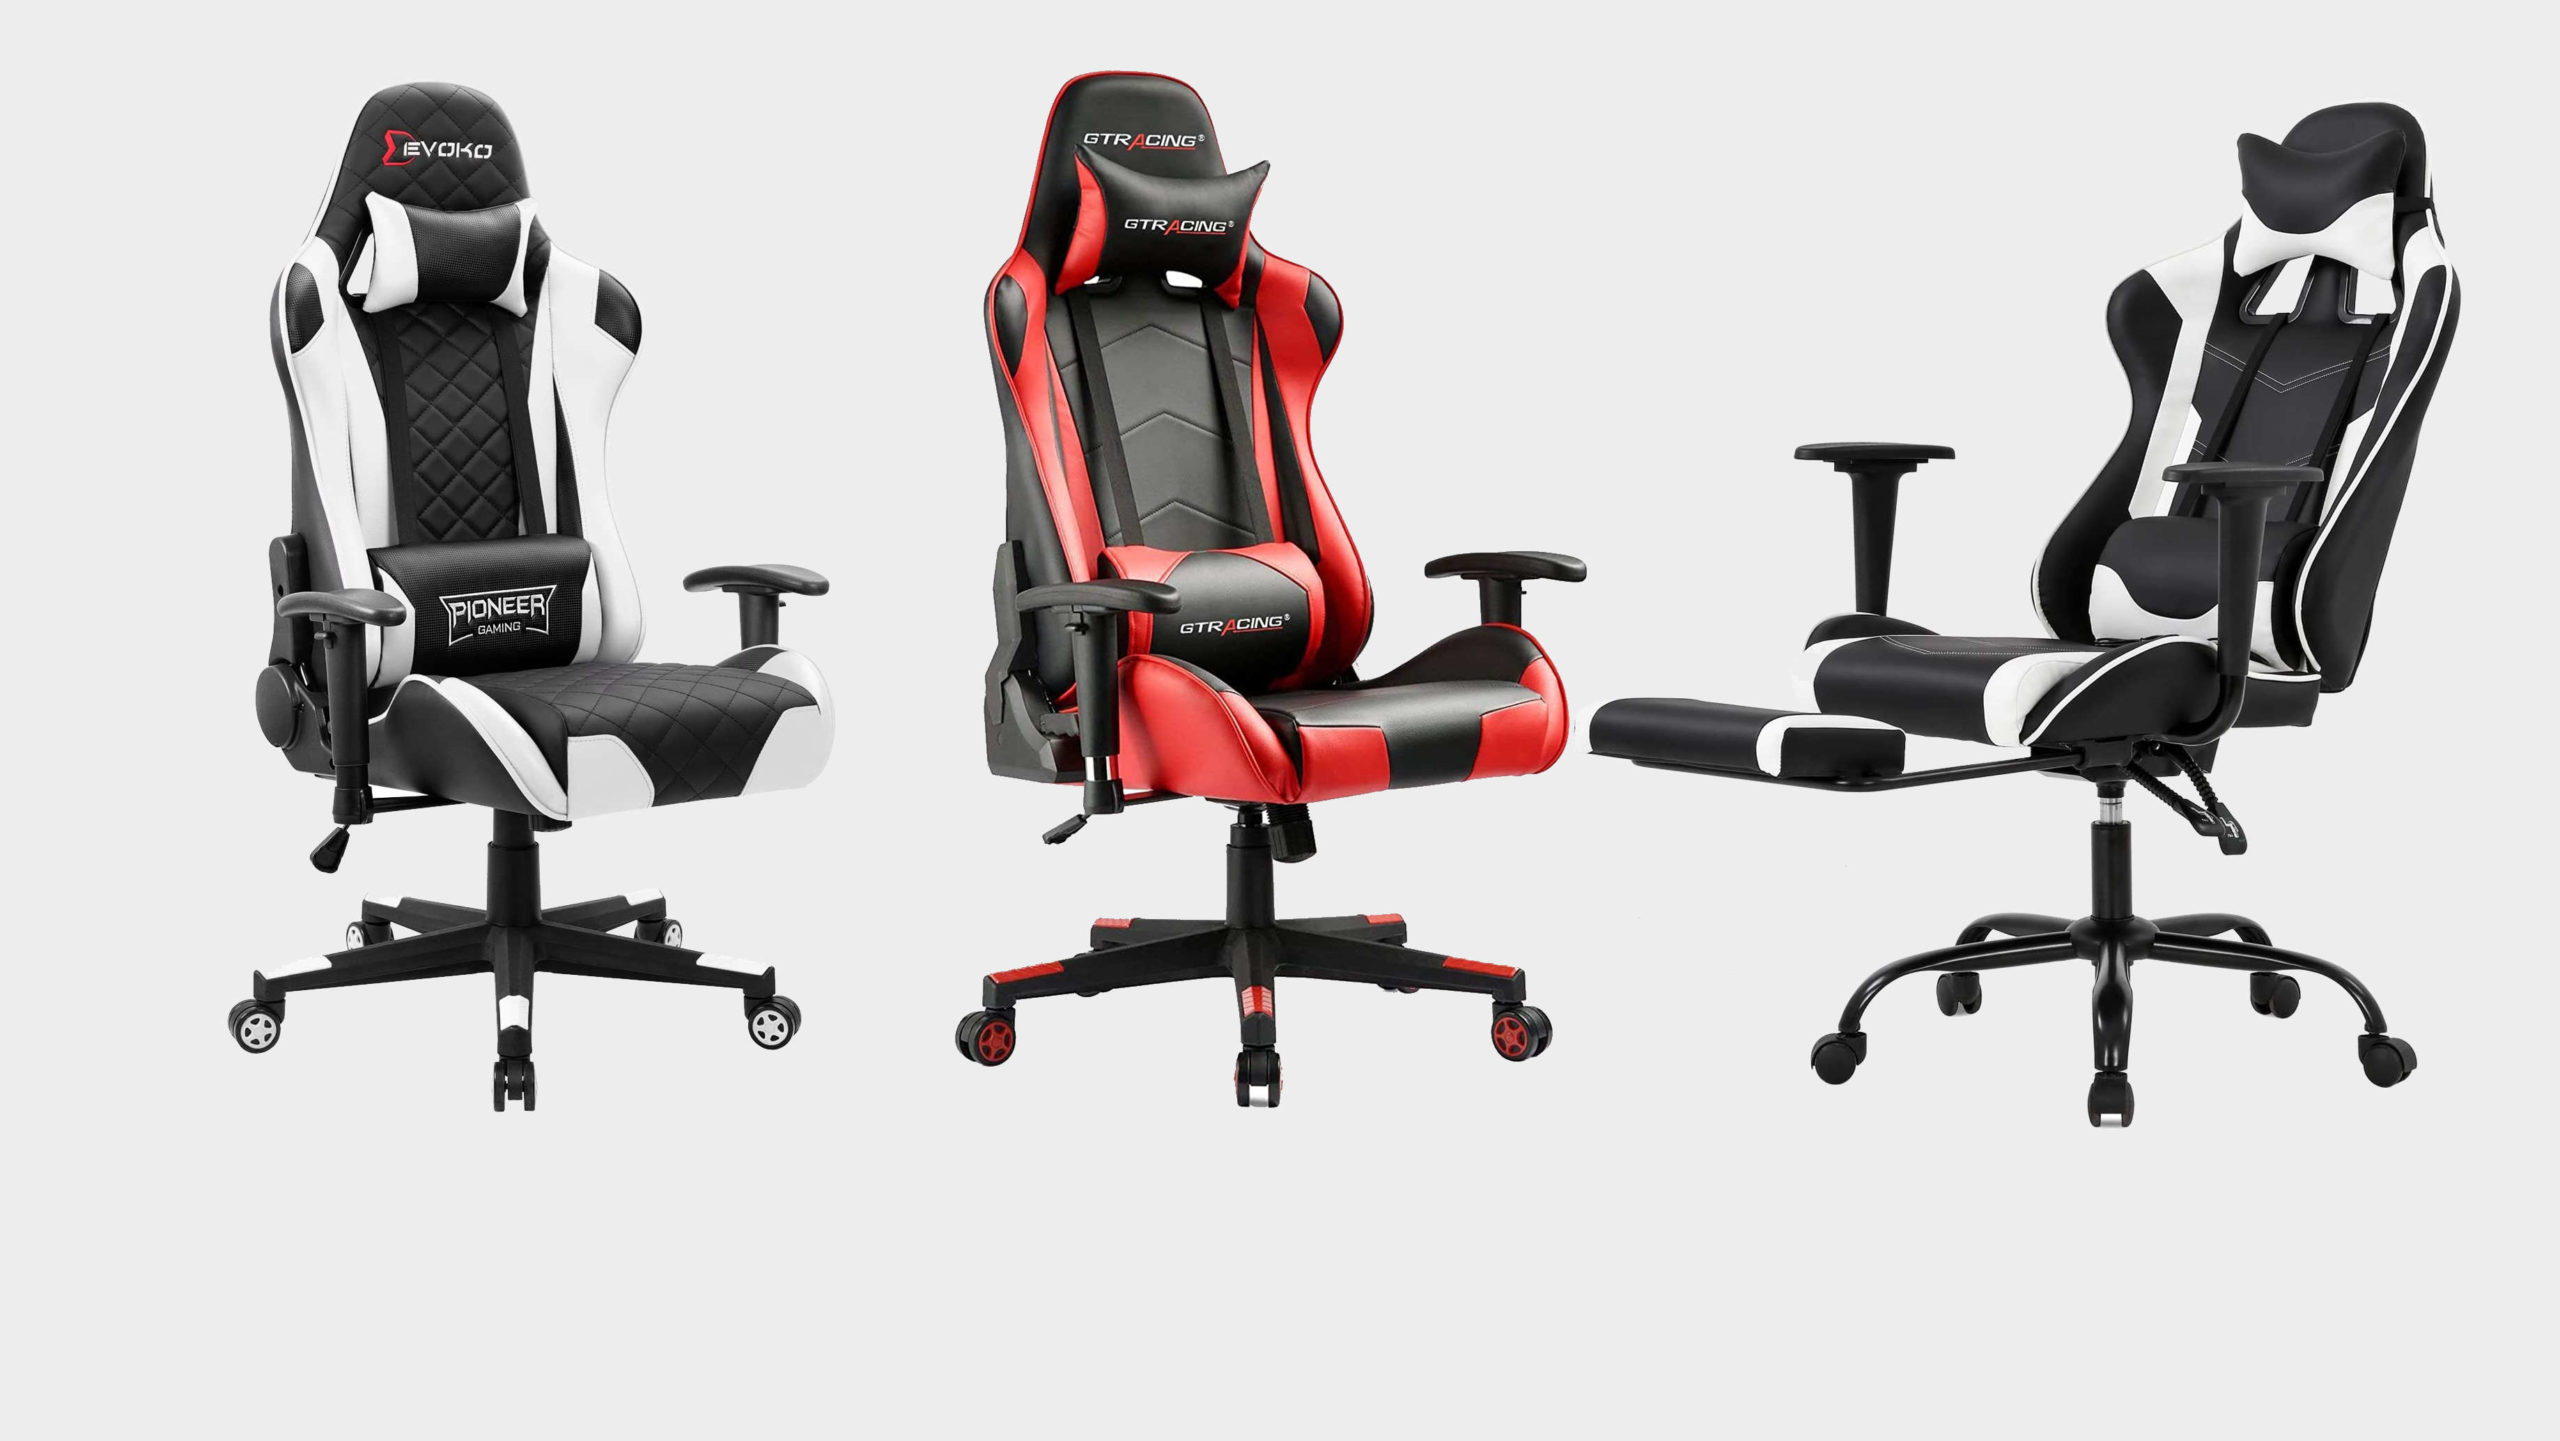 Why Do You Need Gaming Chairs For Gaming